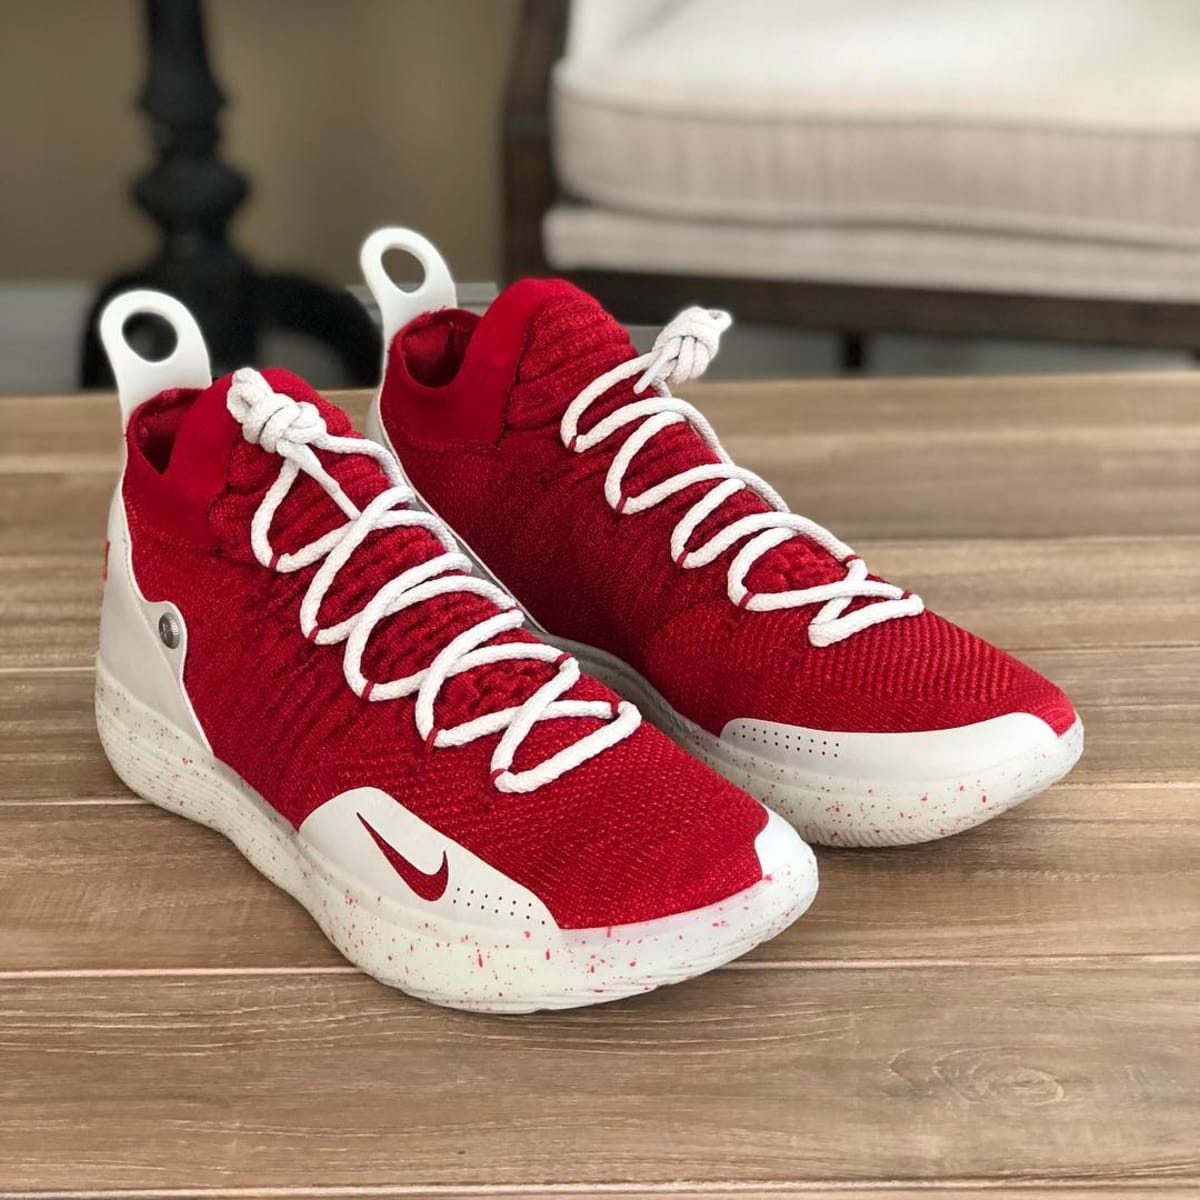 NIKEiD KD 11 University Red White - NIKEiD By You KD 11 Designs | Sole ...